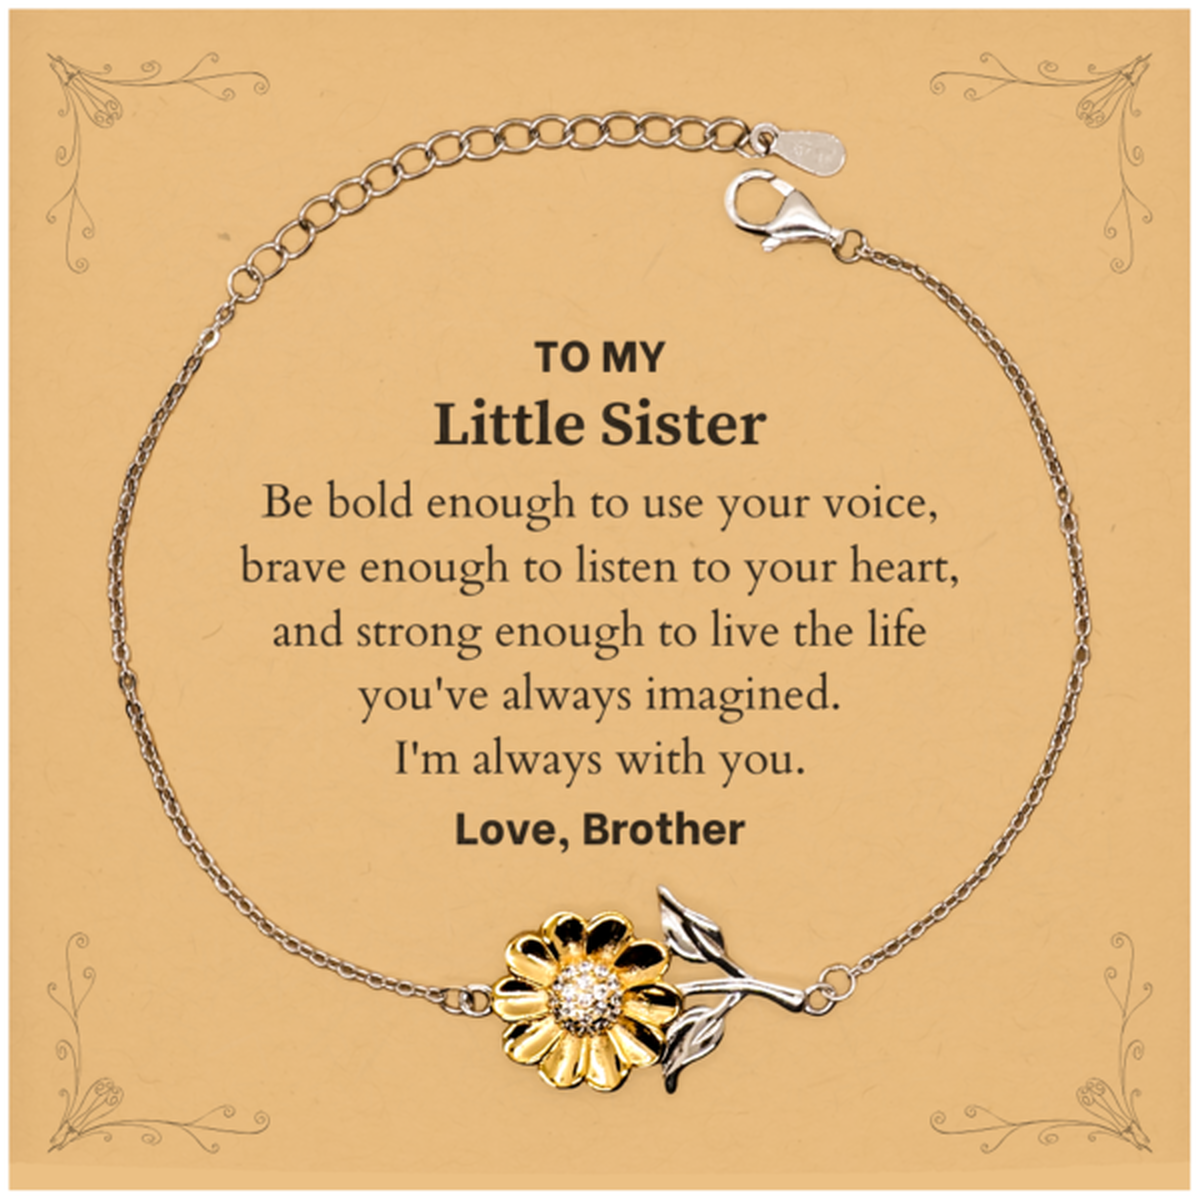 Keepsake Little Sister Sunflower Bracelet Gift Idea Graduation Christmas Birthday Little Sister from Brother, Little Sister Be bold enough to use your voice, brave enough to listen to your heart. Love, Brother